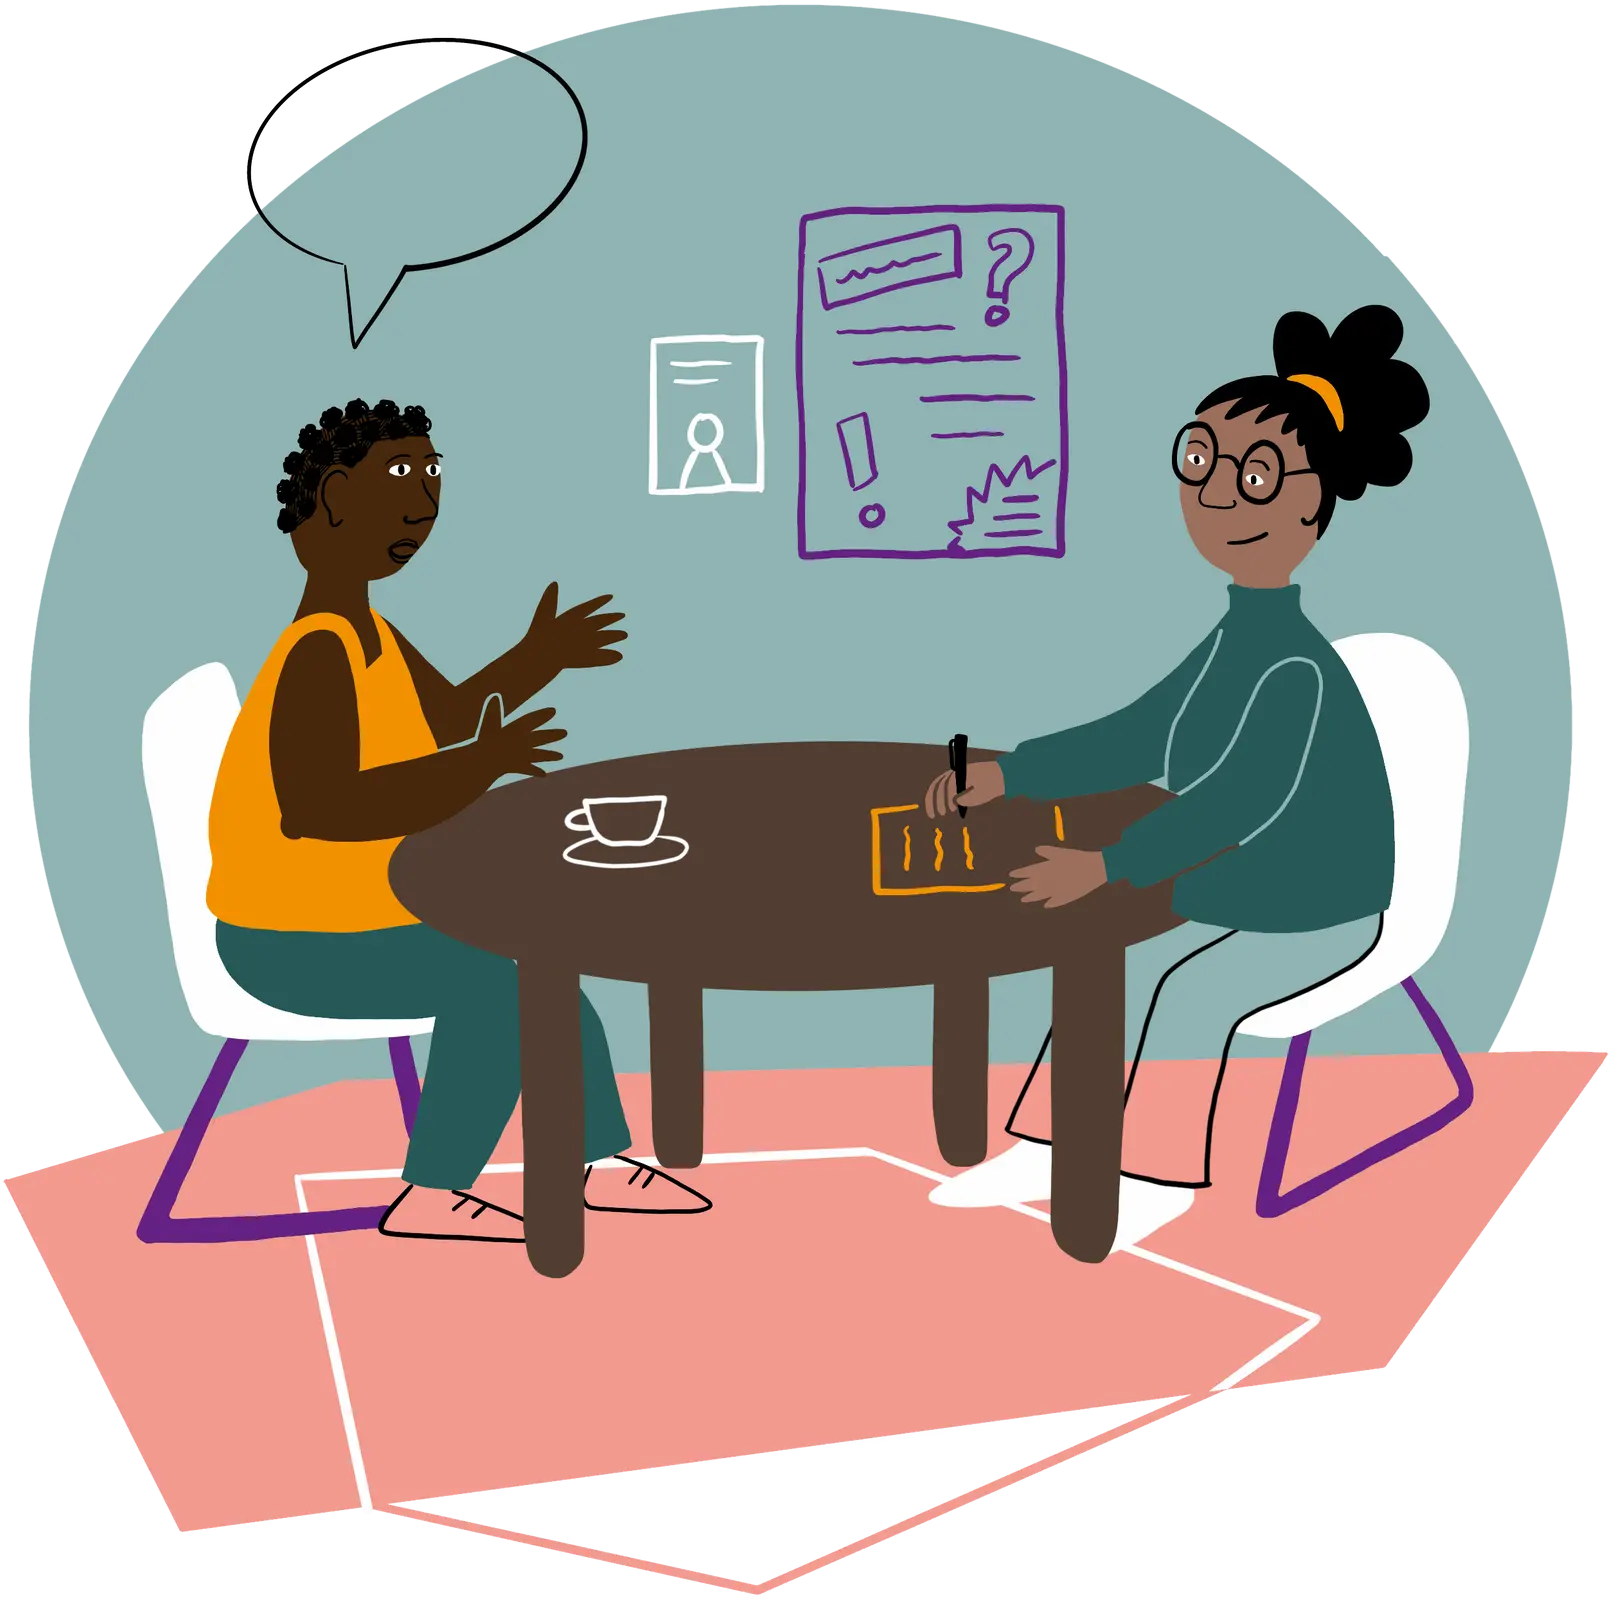 The illustration shows two people from different ethnic backgrounds behind different colorful and geometric shapes. One person is describing an event and the other person is taking notes. A counseling scenario is depicted.